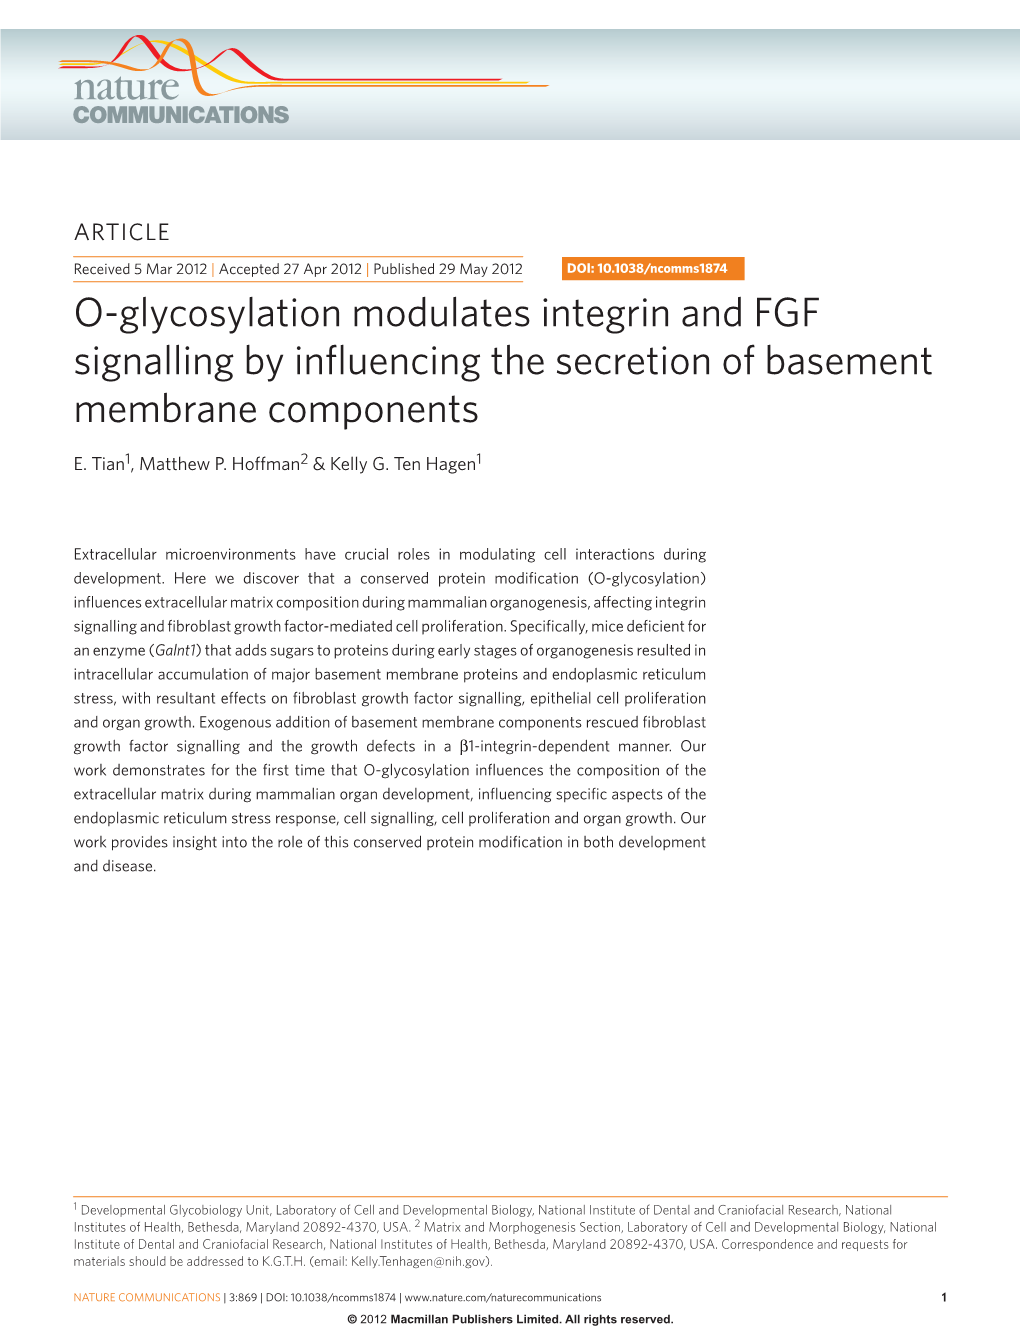 O-Glycosylation Modulates Integrin and FGF Signalling by Influencing the Secretion of Basement Membrane Components